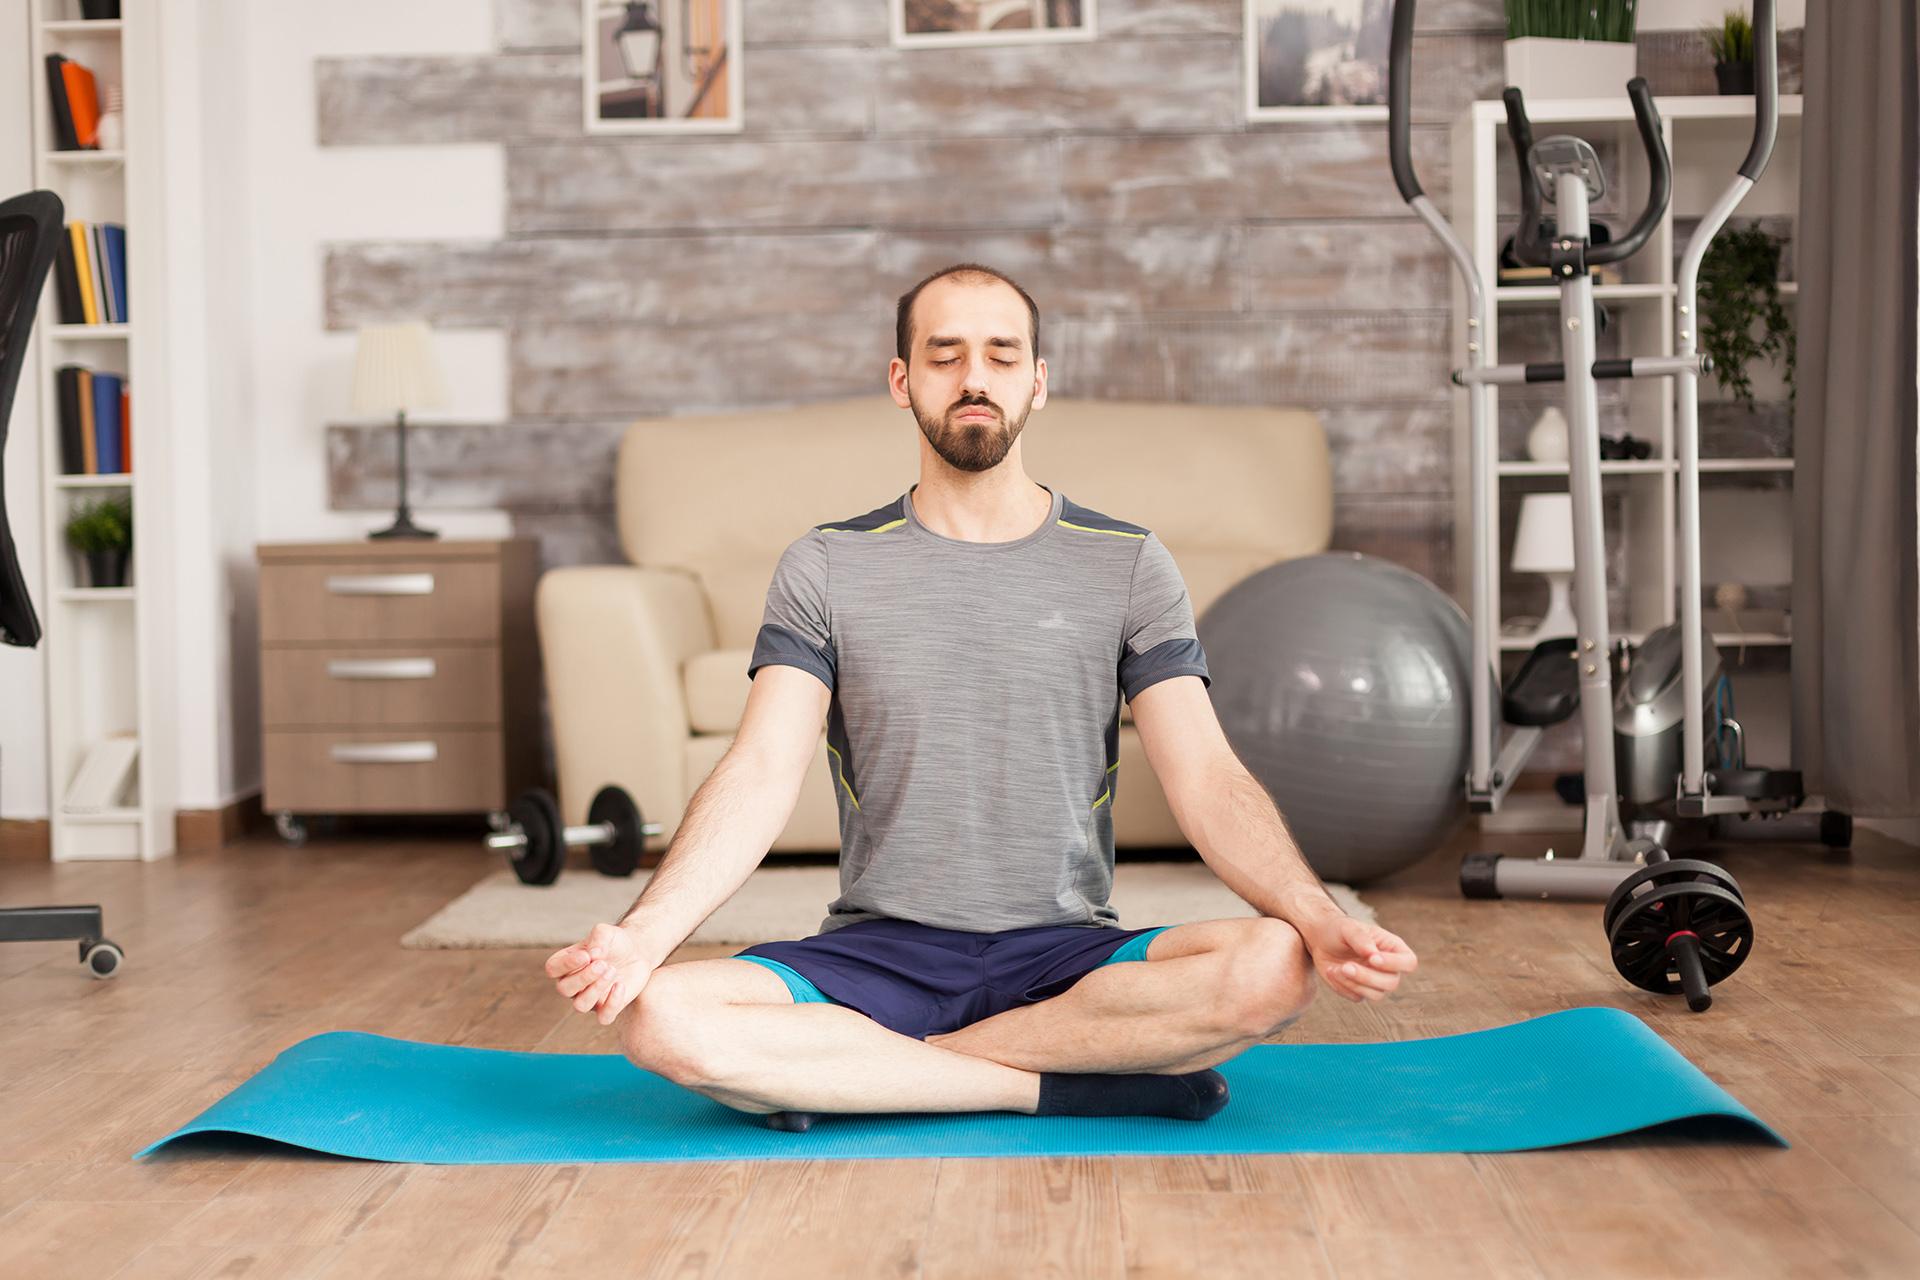 Yoga for COVID Patients: Top Poses to Strengthen Your Lungs